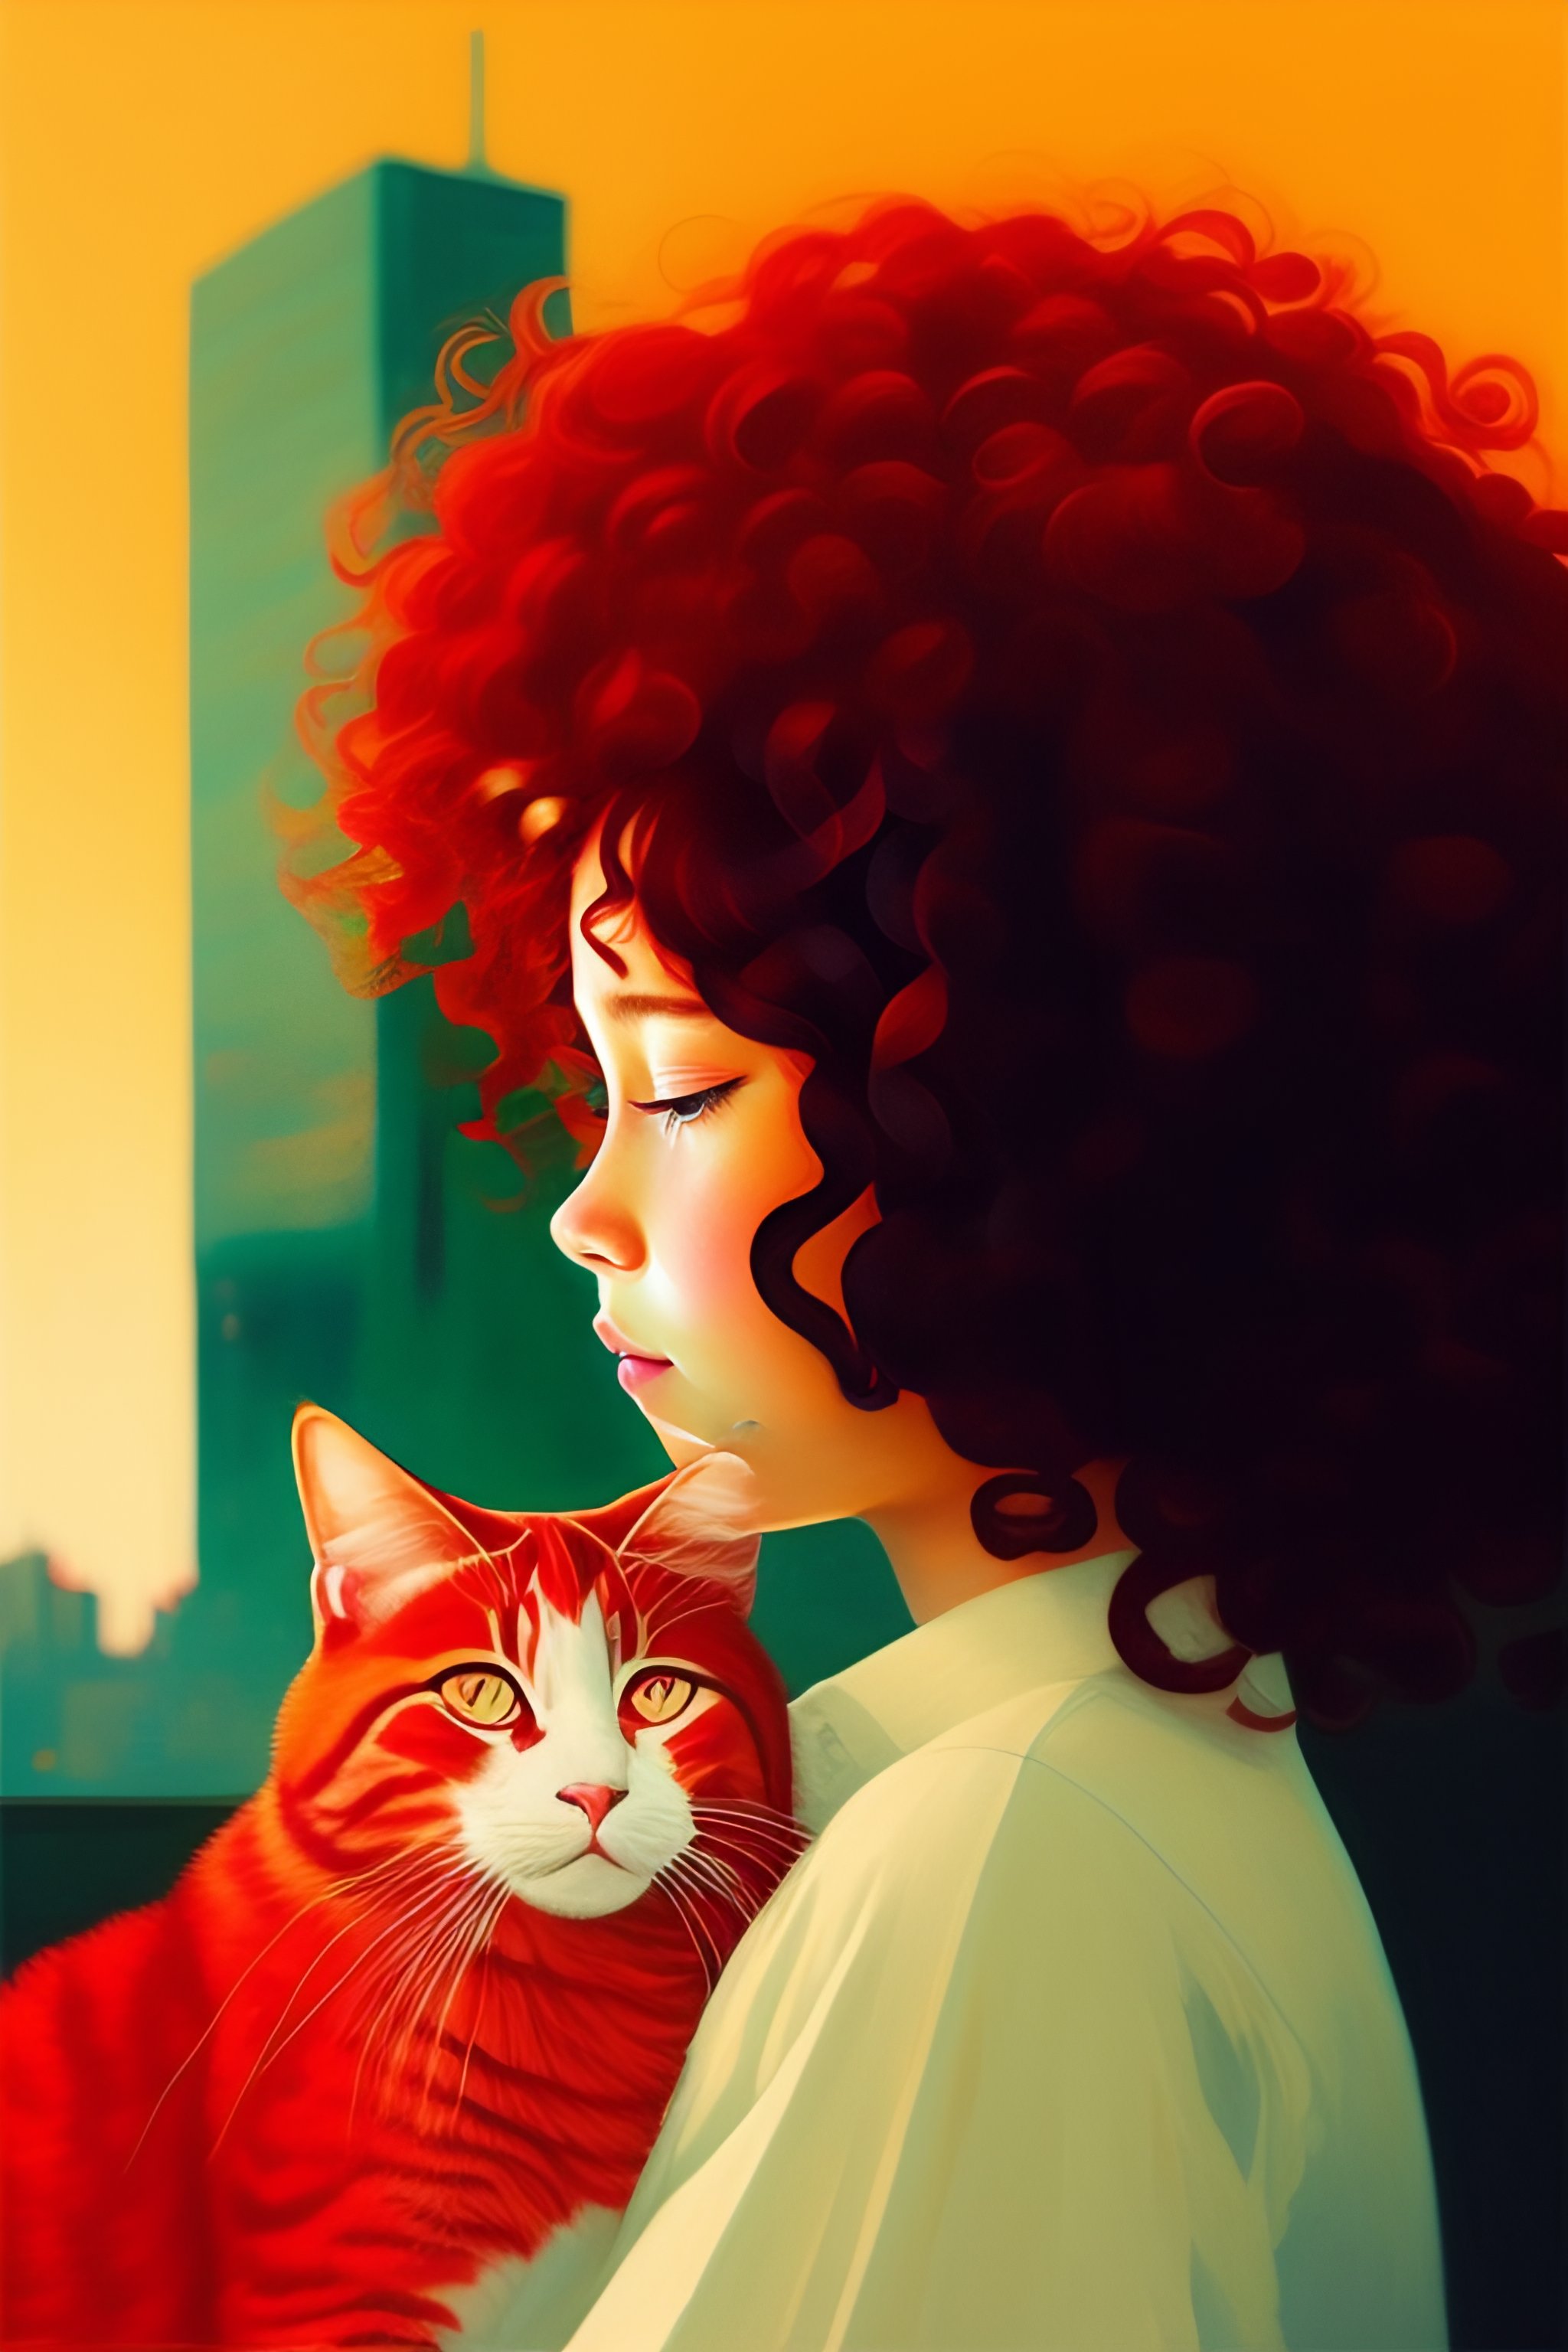 tumblr red curly hair